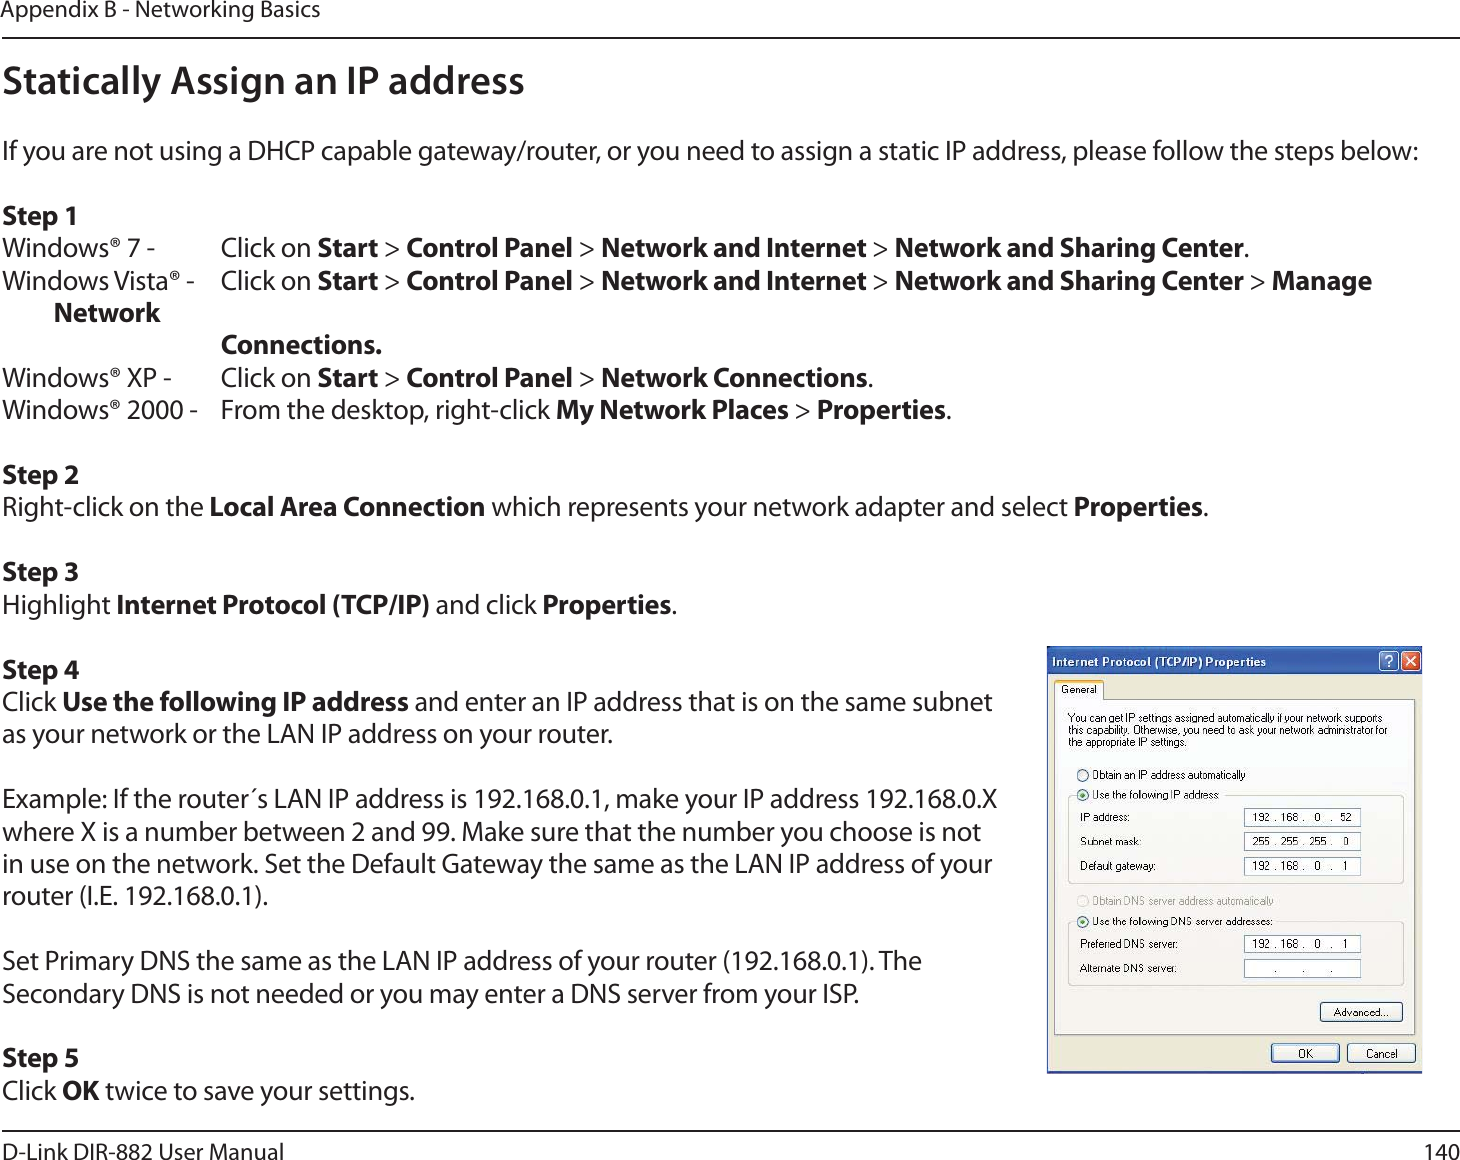 140D-Link DIR-882 User ManualAppendix B - Networking BasicsStatically Assign an IP addressIf you are not using a DHCP capable gateway/router, or you need to assign a static IP address, please follow the steps below:Step 1Windows® 7 -  Click on Start &gt; Control Panel &gt; Network and Internet &gt; Network and Sharing Center.Windows Vista® -  Click on Start &gt; Control Panel &gt; Network and Internet &gt; Network and Sharing Center &gt; Manage Network      Connections.Windows® XP -  Click on Start &gt; Control Panel &gt; Network Connections.Windows® 2000 -  From the desktop, right-click My Network Places &gt; Properties.Step 2Right-click on the -PDBM&quot;SFB$POOFDUJPO which represents your network adapter and select Properties.Step 3Highlight *OUFSOFU1SPUPDPM5$1*1 and click Properties.Step 4Click Use the following IP address and enter an IP address that is on the same subnet as your network or the LAN IP address on your router. Example: If the router´s LAN IP address is 192.168.0.1, make your IP address 192.168.0.X where X is a number between 2 and 99. Make sure that the number you choose is not in use on the network. Set the Default Gateway the same as the LAN IP address of your router (I.E. 192.168.0.1). Set Primary DNS the same as the LAN IP address of your router (192.168.0.1). The Secondary DNS is not needed or you may enter a DNS server from your ISP.Step 5Click OK twice to save your settings.